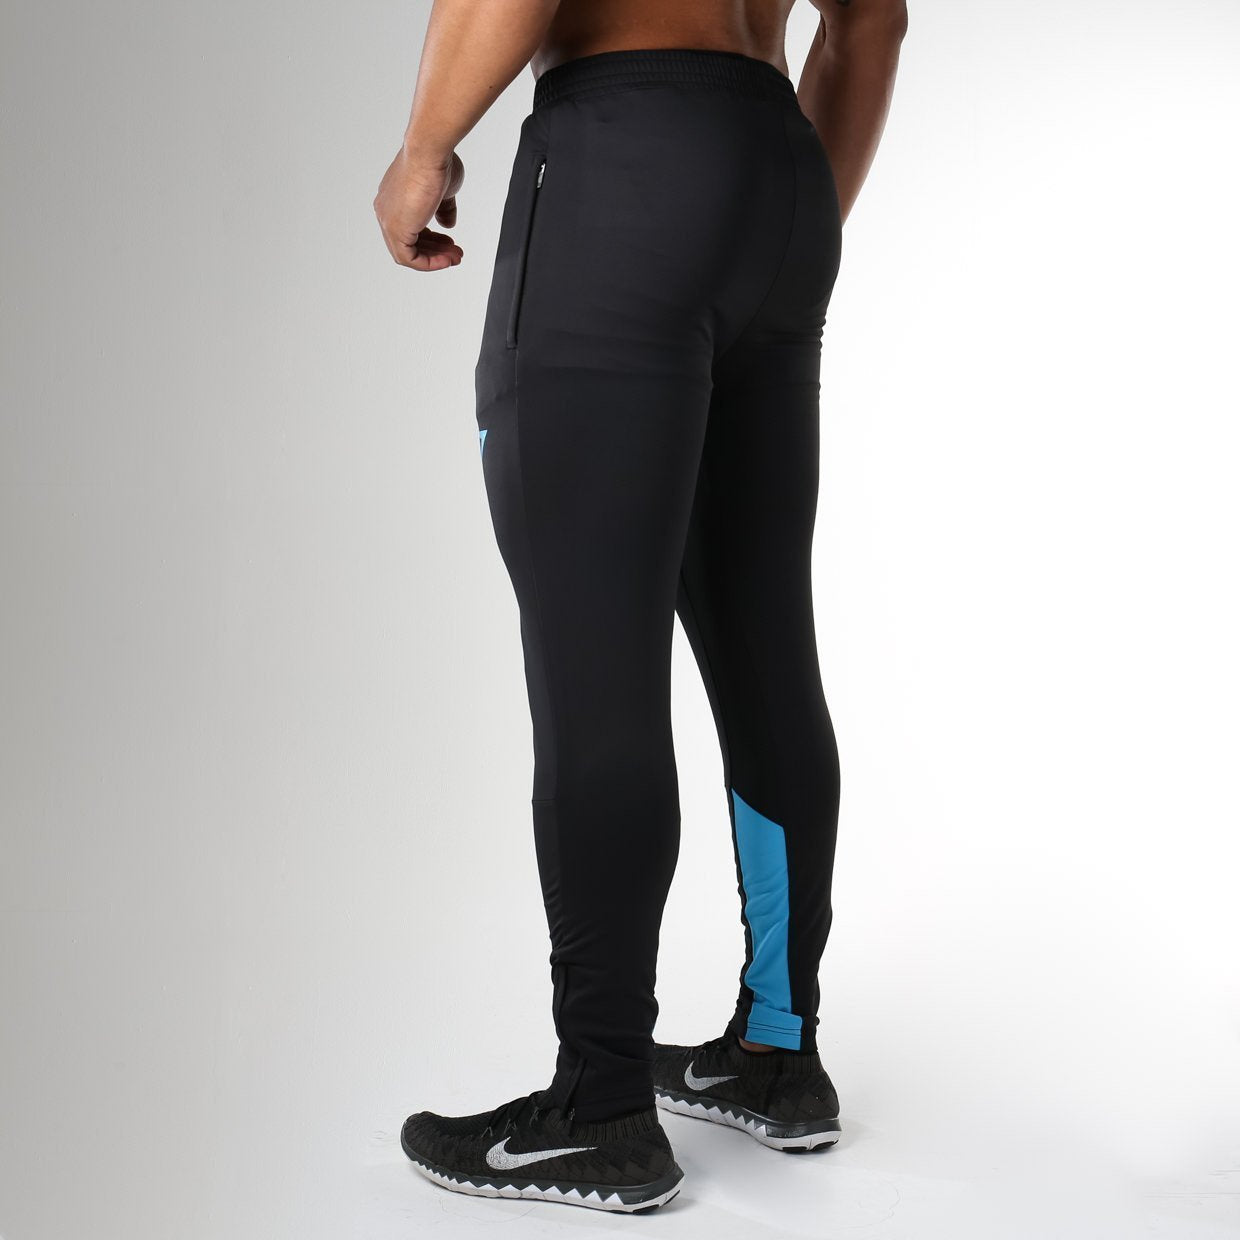 Reactive Training Pant in Black/Blue - view 3